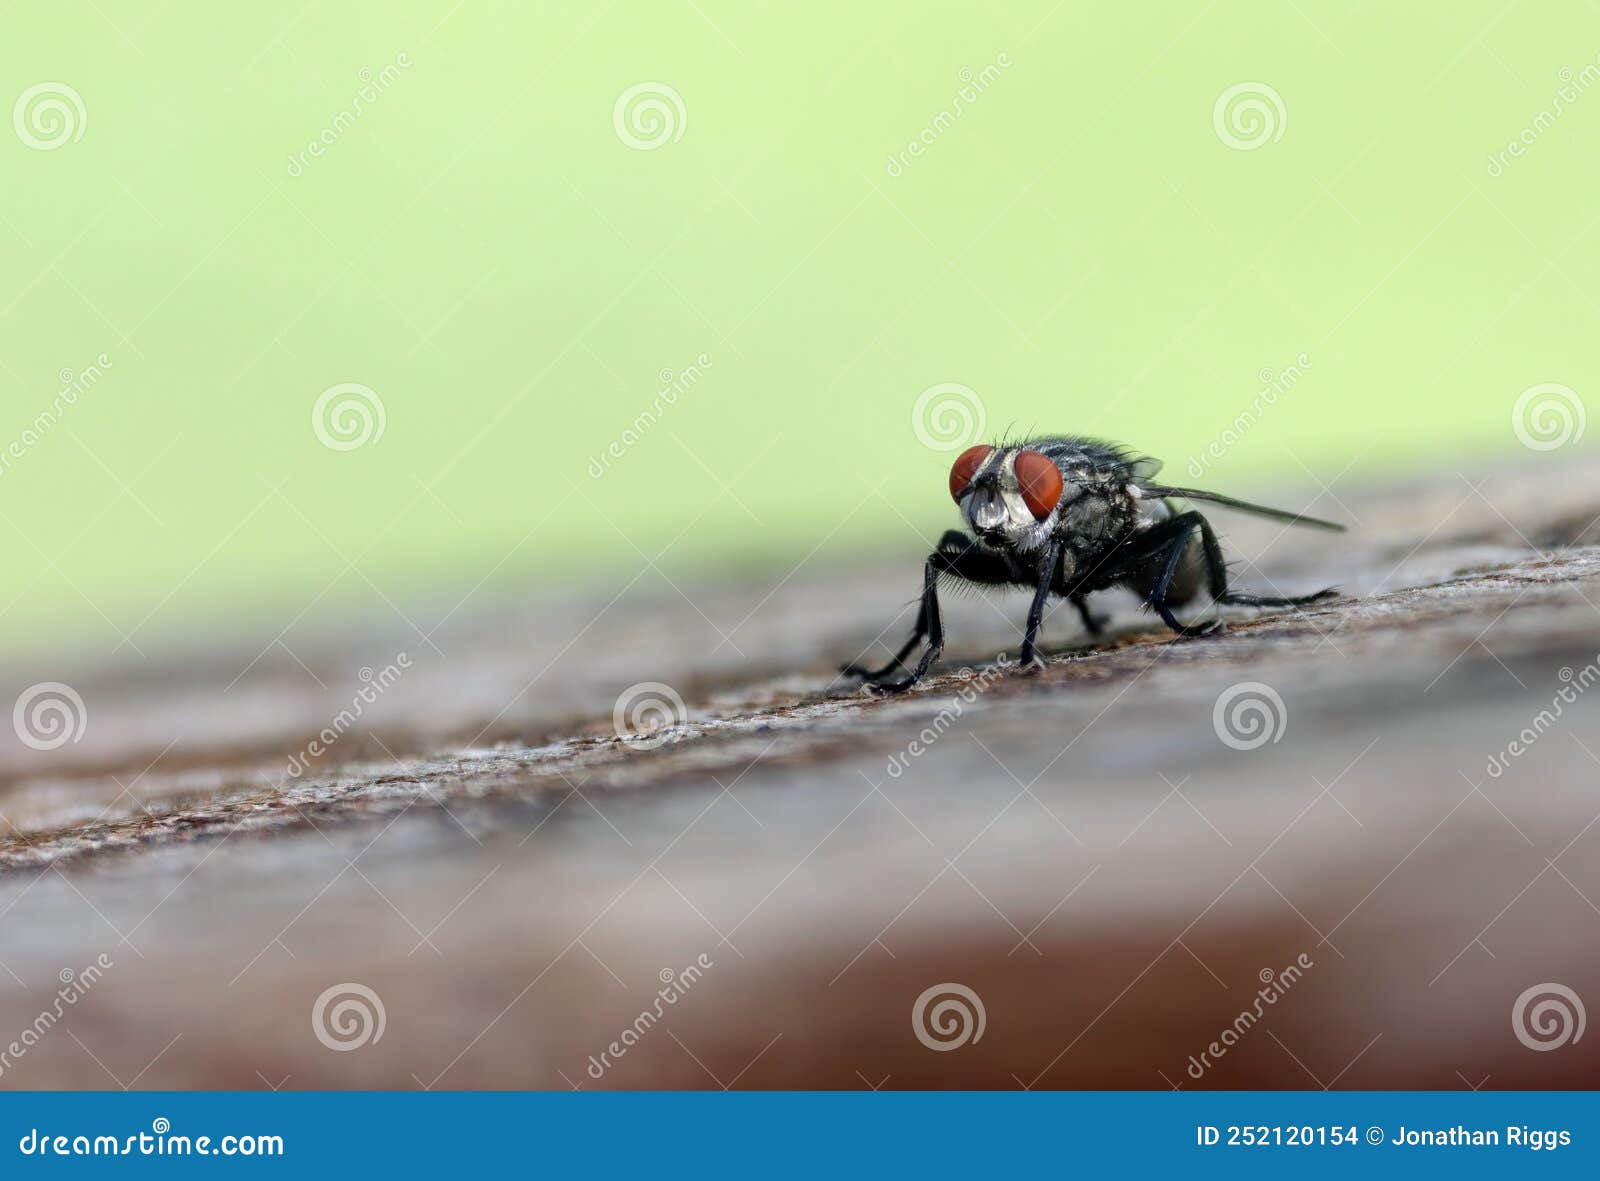 a housefly sits on a wooden bannister